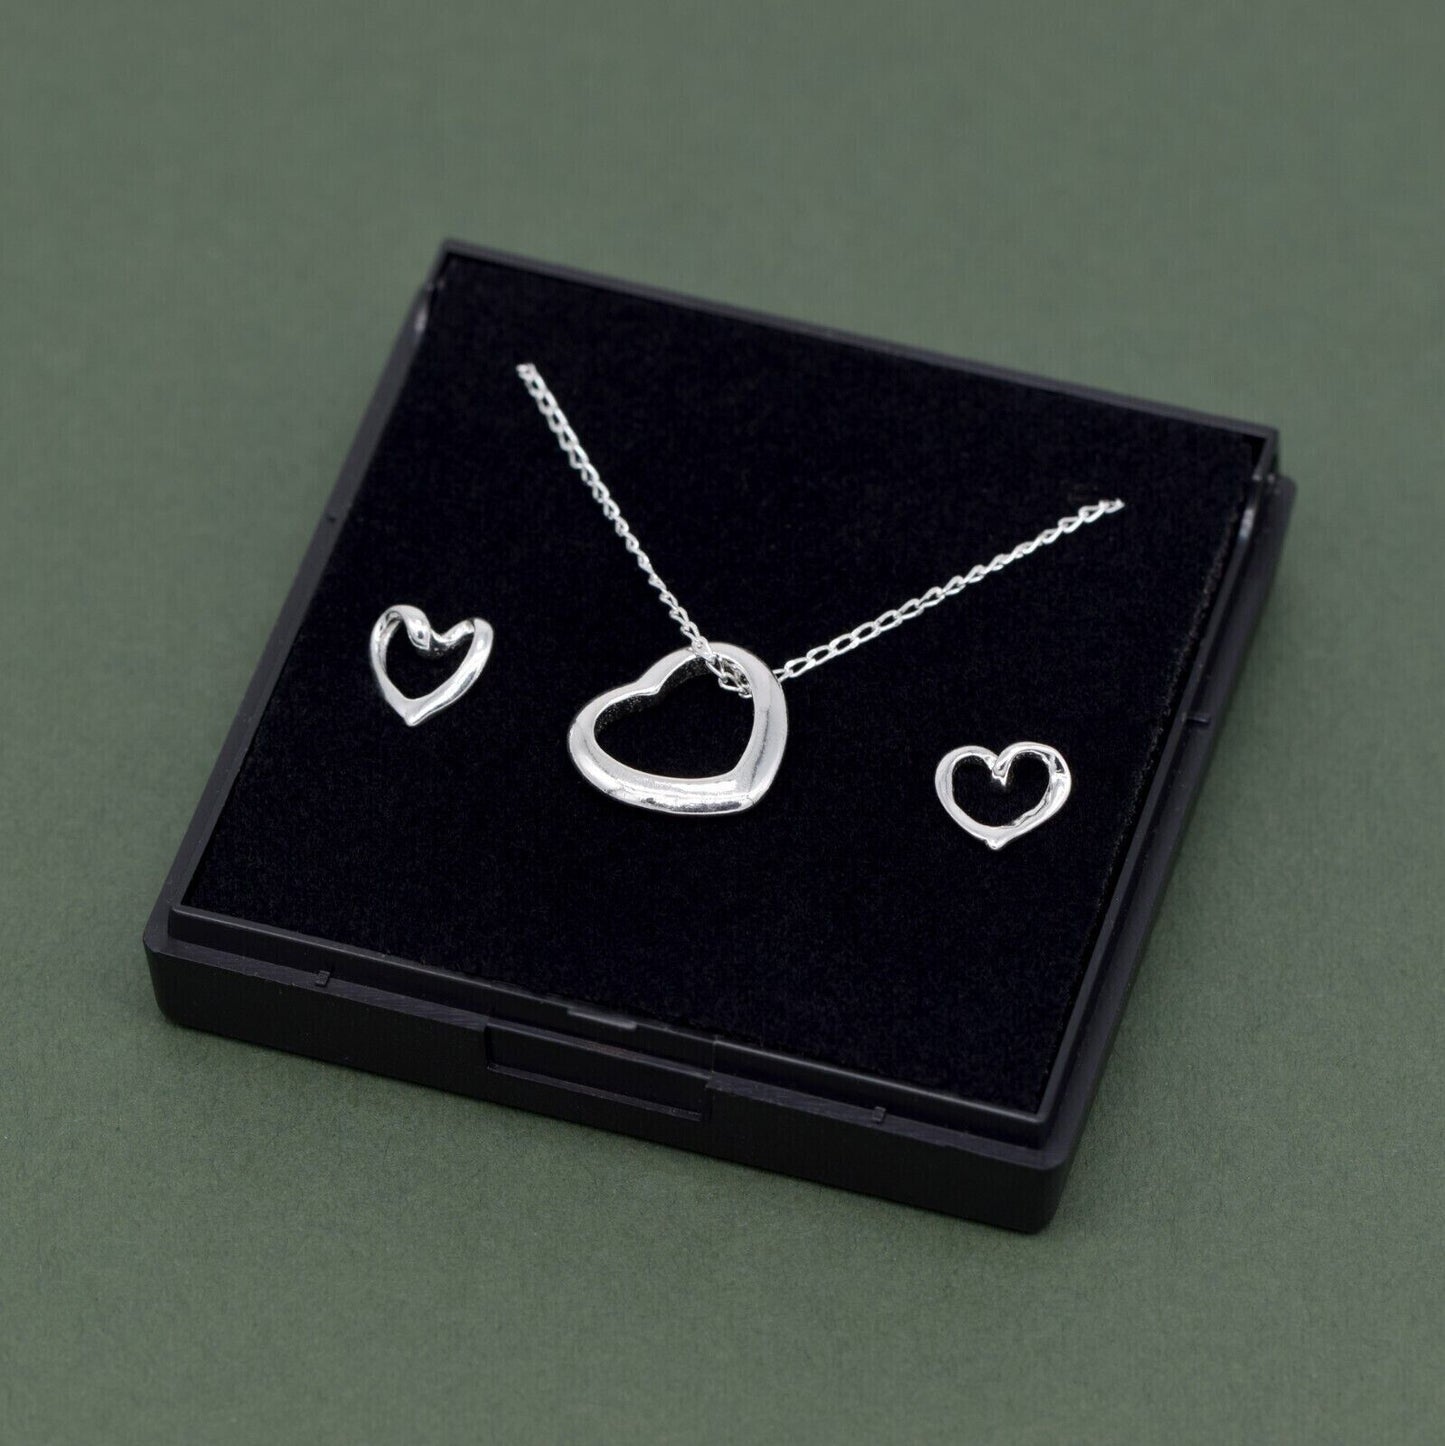 Genuine 925 Sterling Silver Floating Heart Necklace & Earring Set in Gift Box